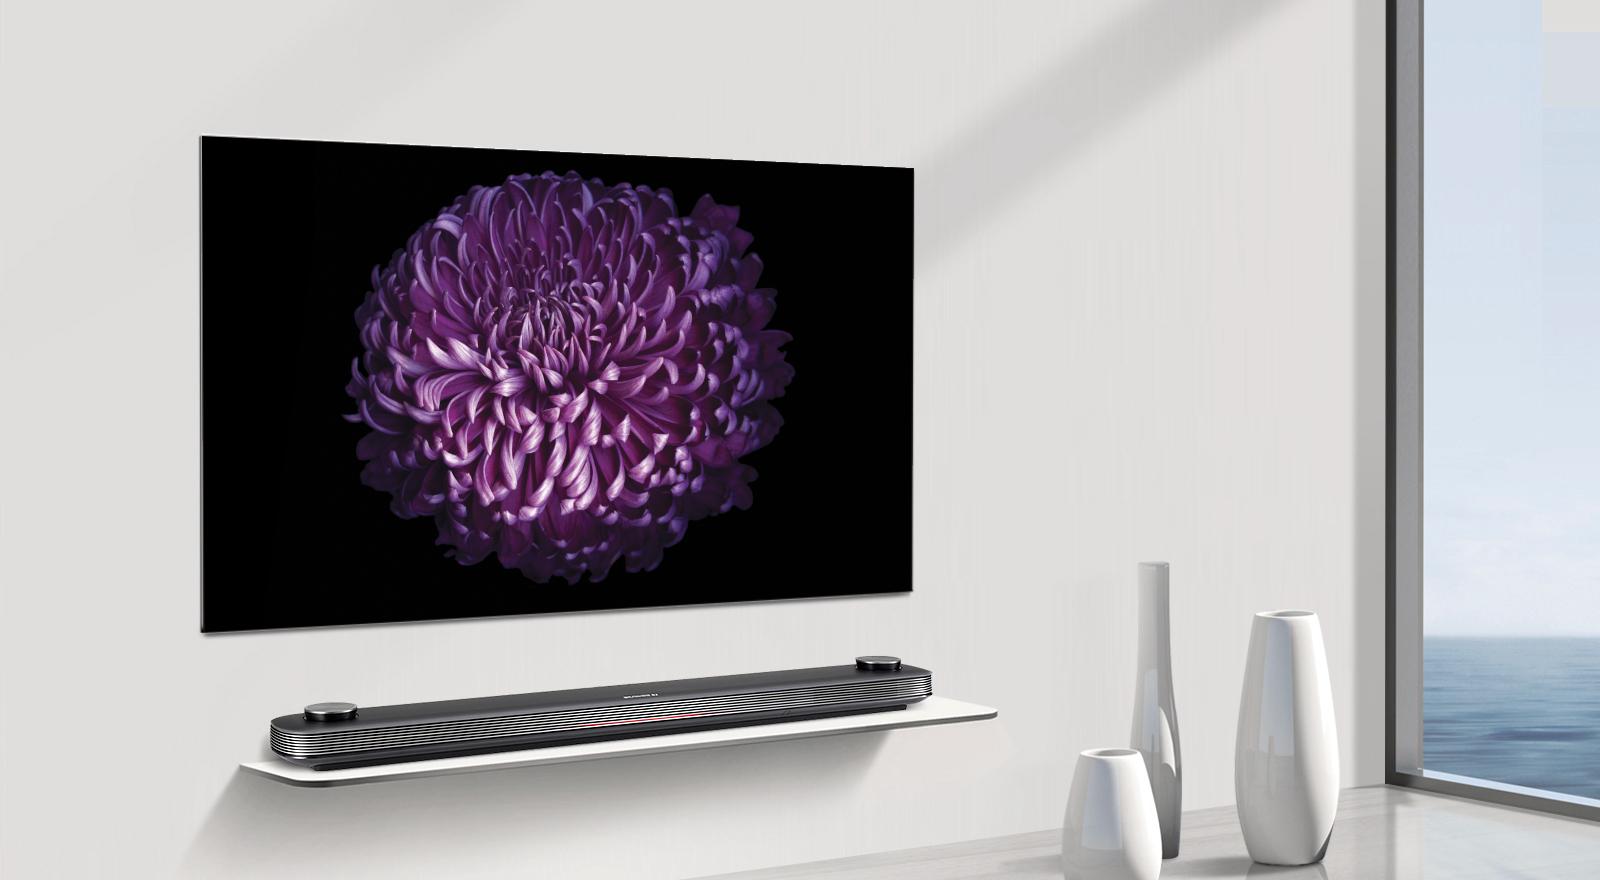 LG's Signature OLED TV redefines the future of televisions